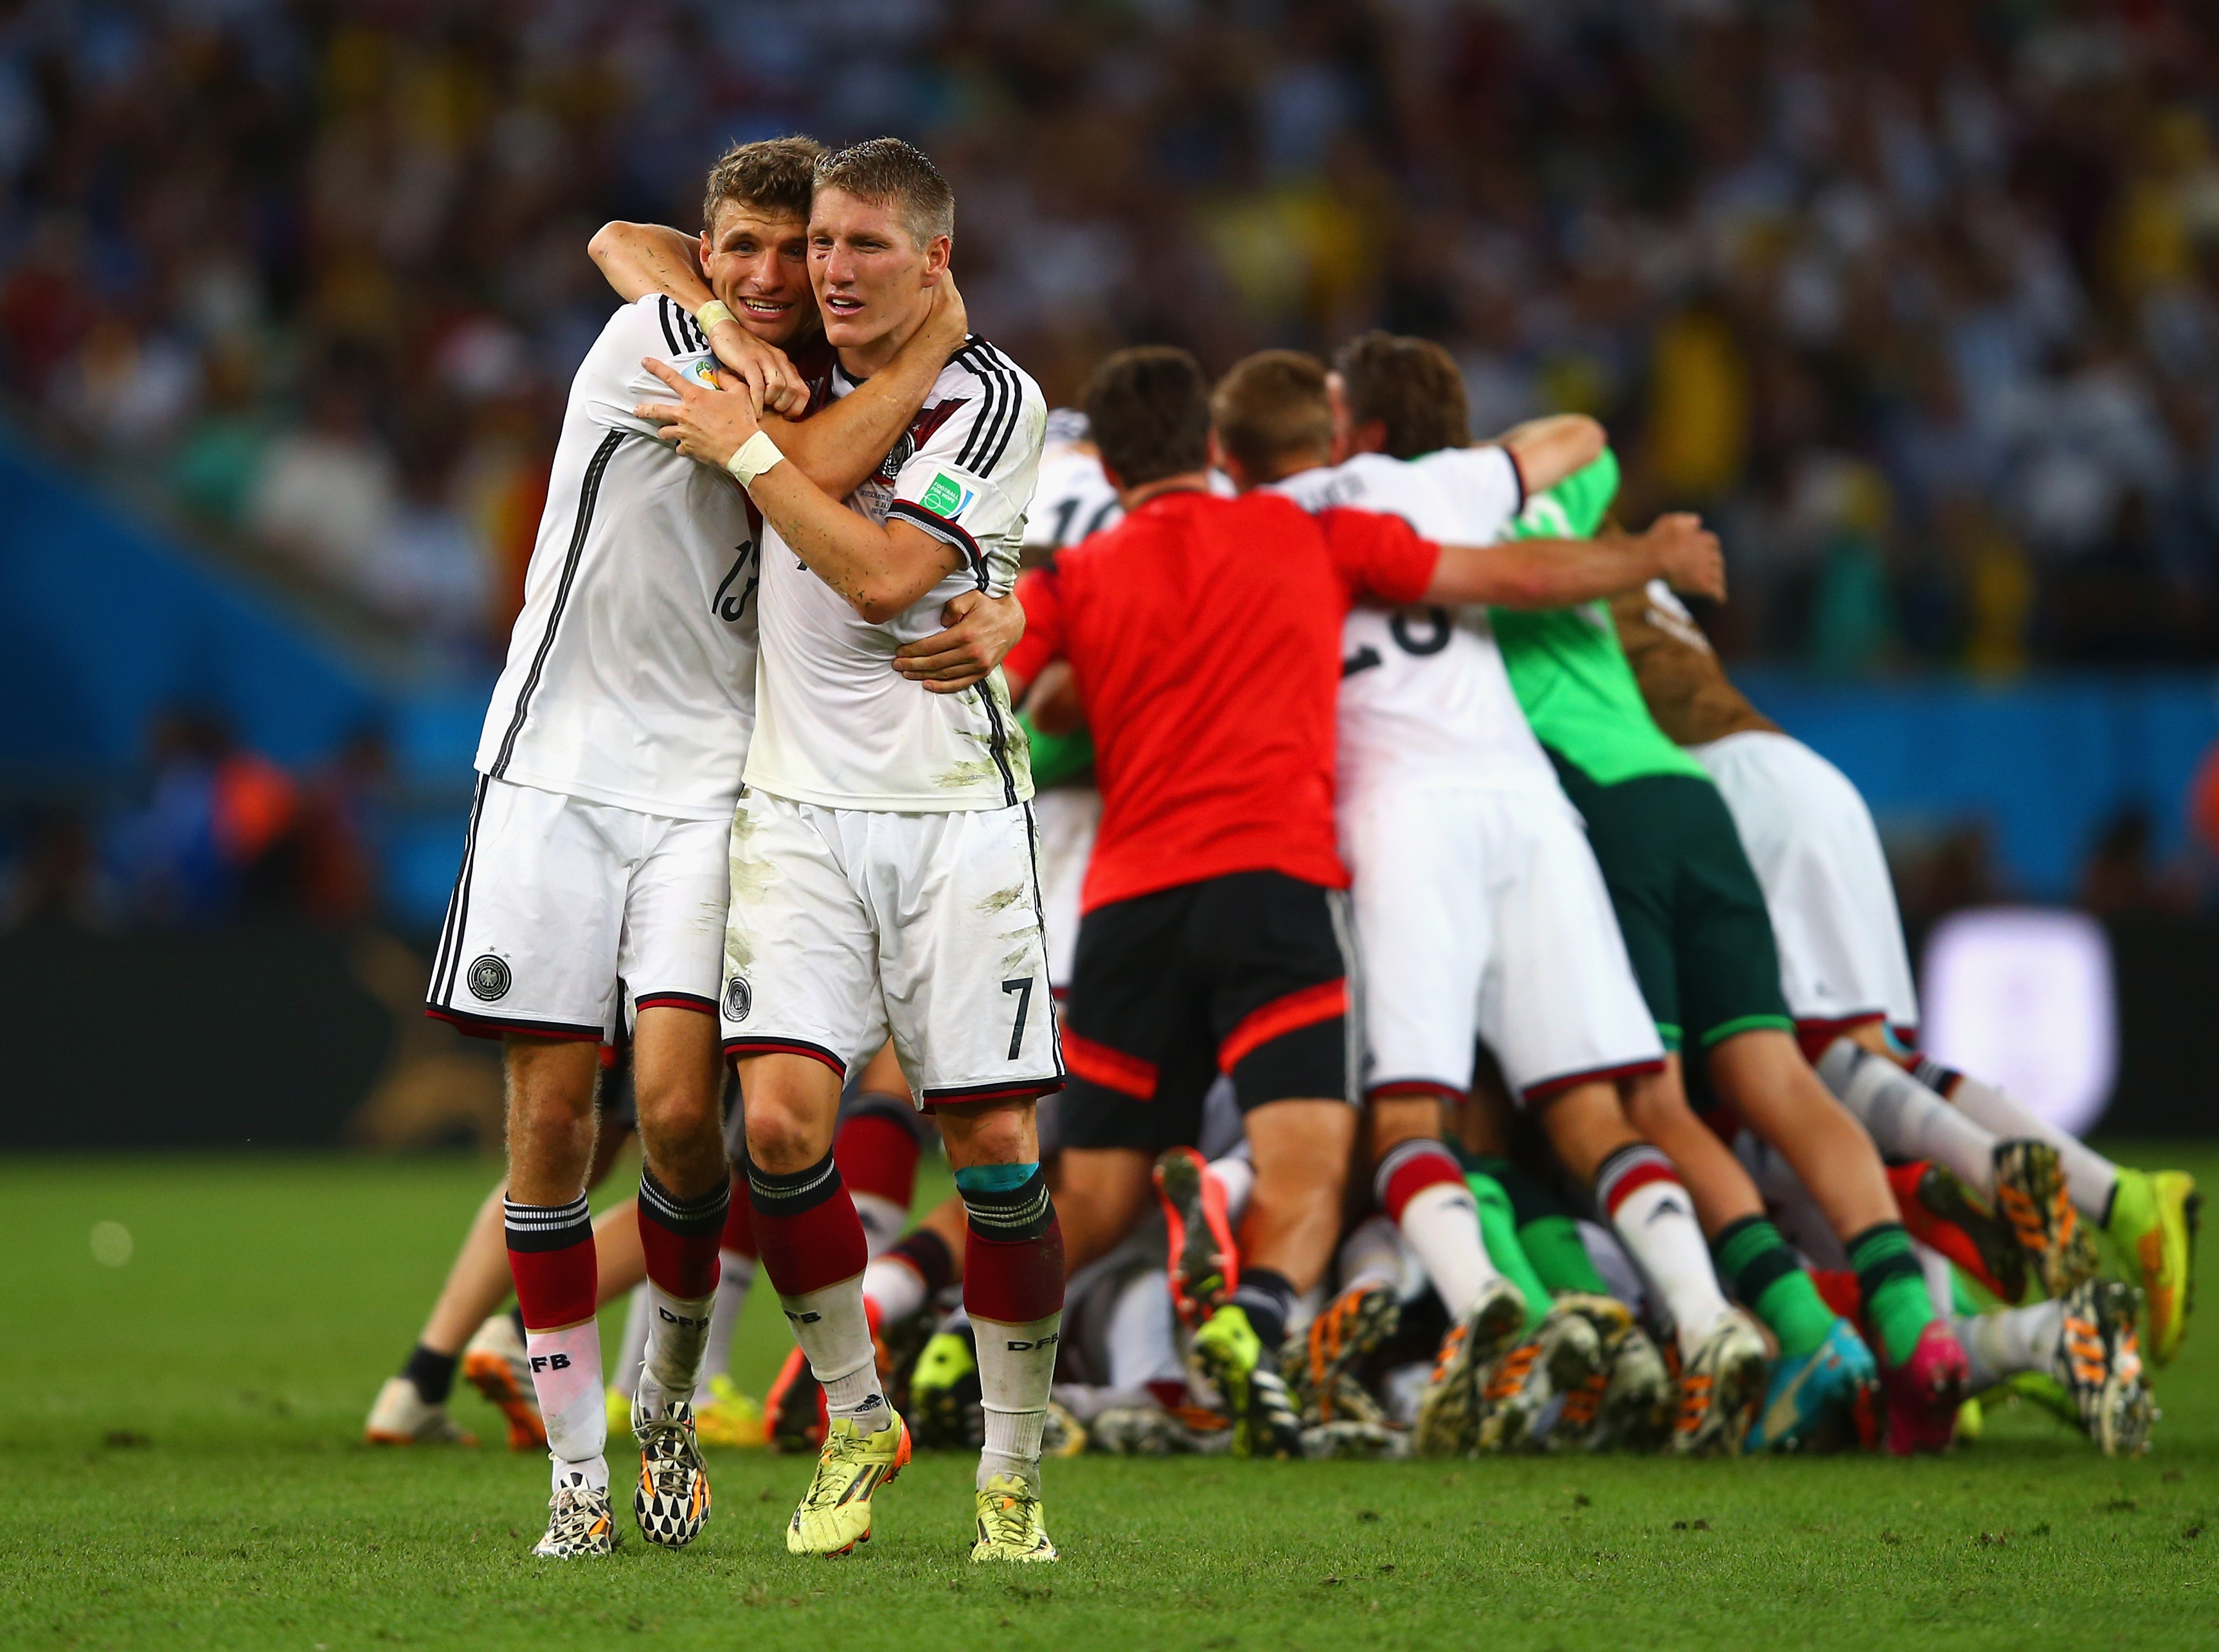 GERMANY vs ARGENTINA Score [PHOTOS]: Germans Win 1-0 In Extra Time In